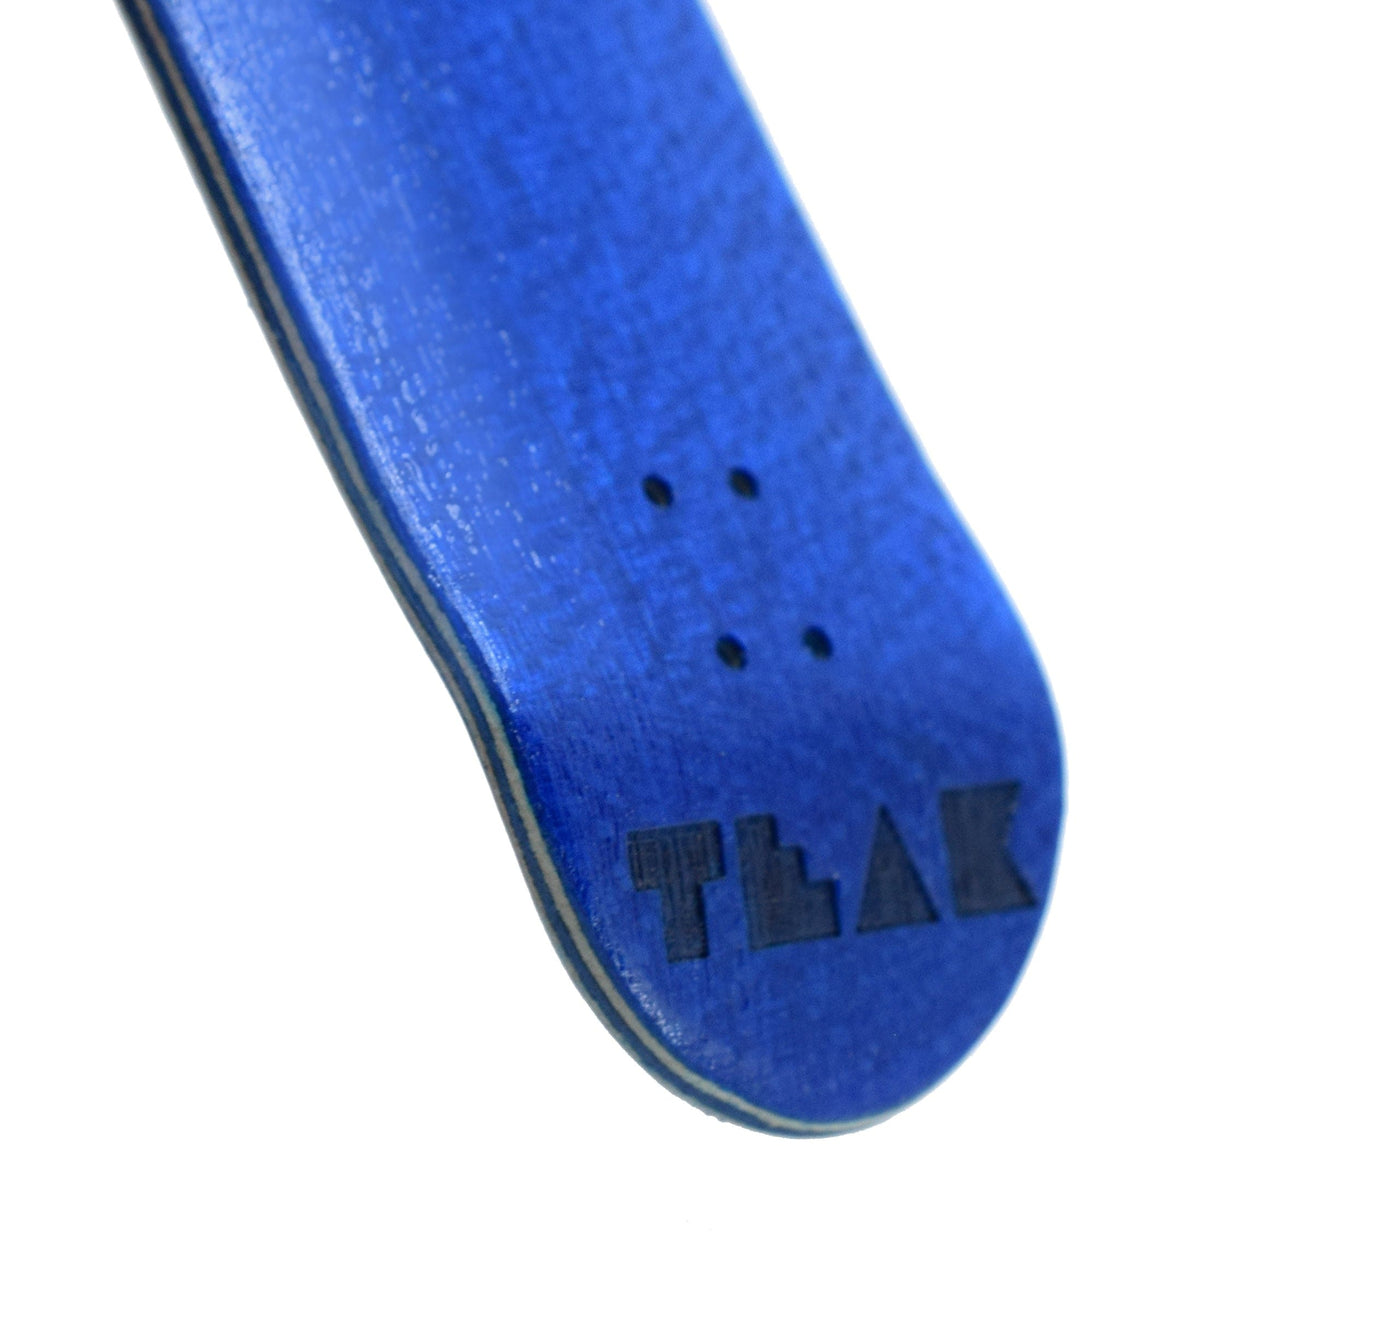 Teak Tuning PROlific Wooden 5 Ply Fingerboard Deck 35x95mm - Blizzard Blue - with Color Matching Mid Ply